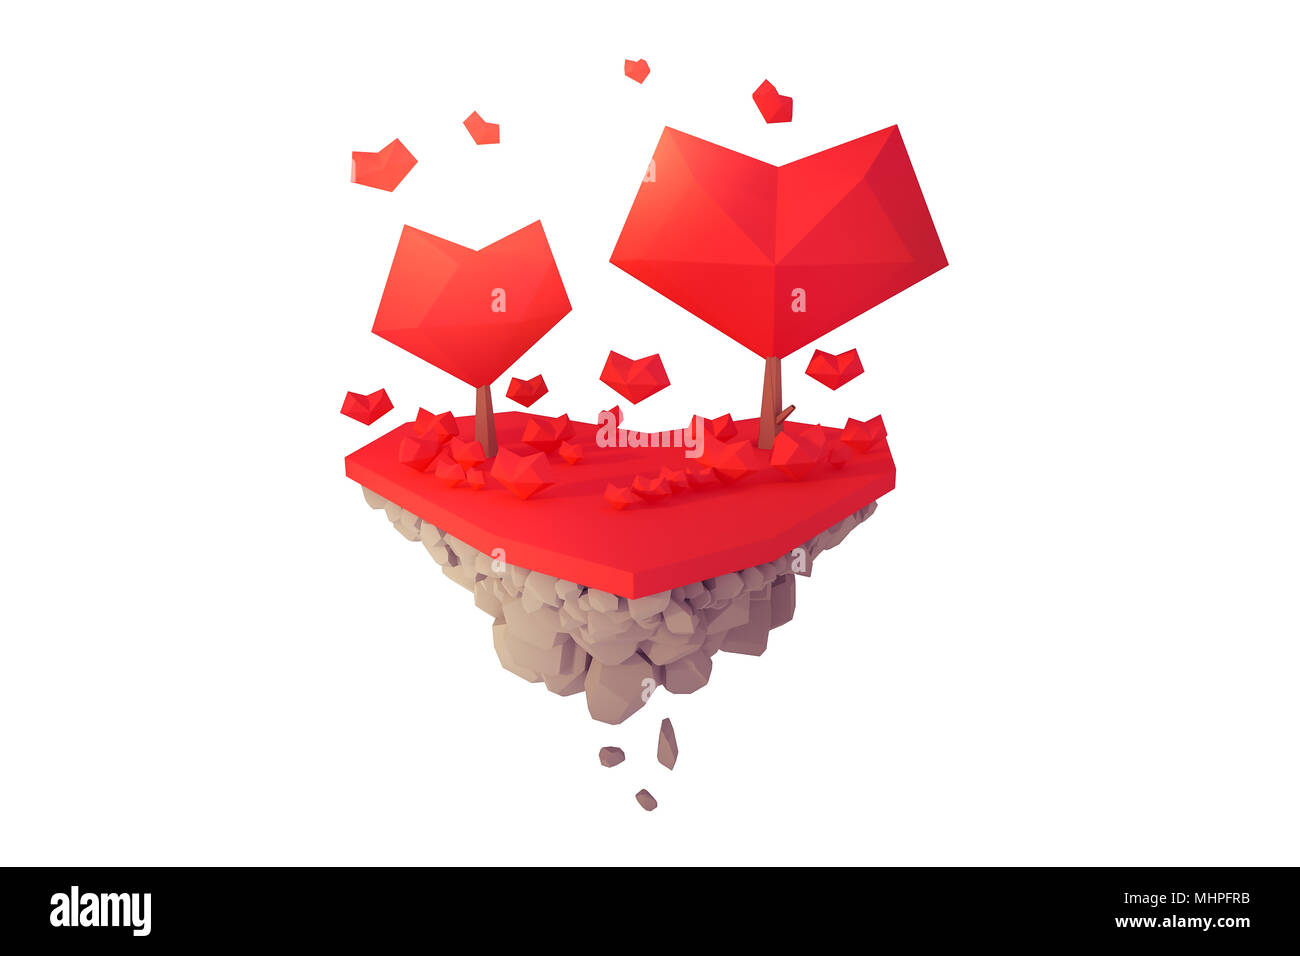 valentine love tree on the heart shape isolated floating island love concept low-poly 3d illustration. Stock Photo